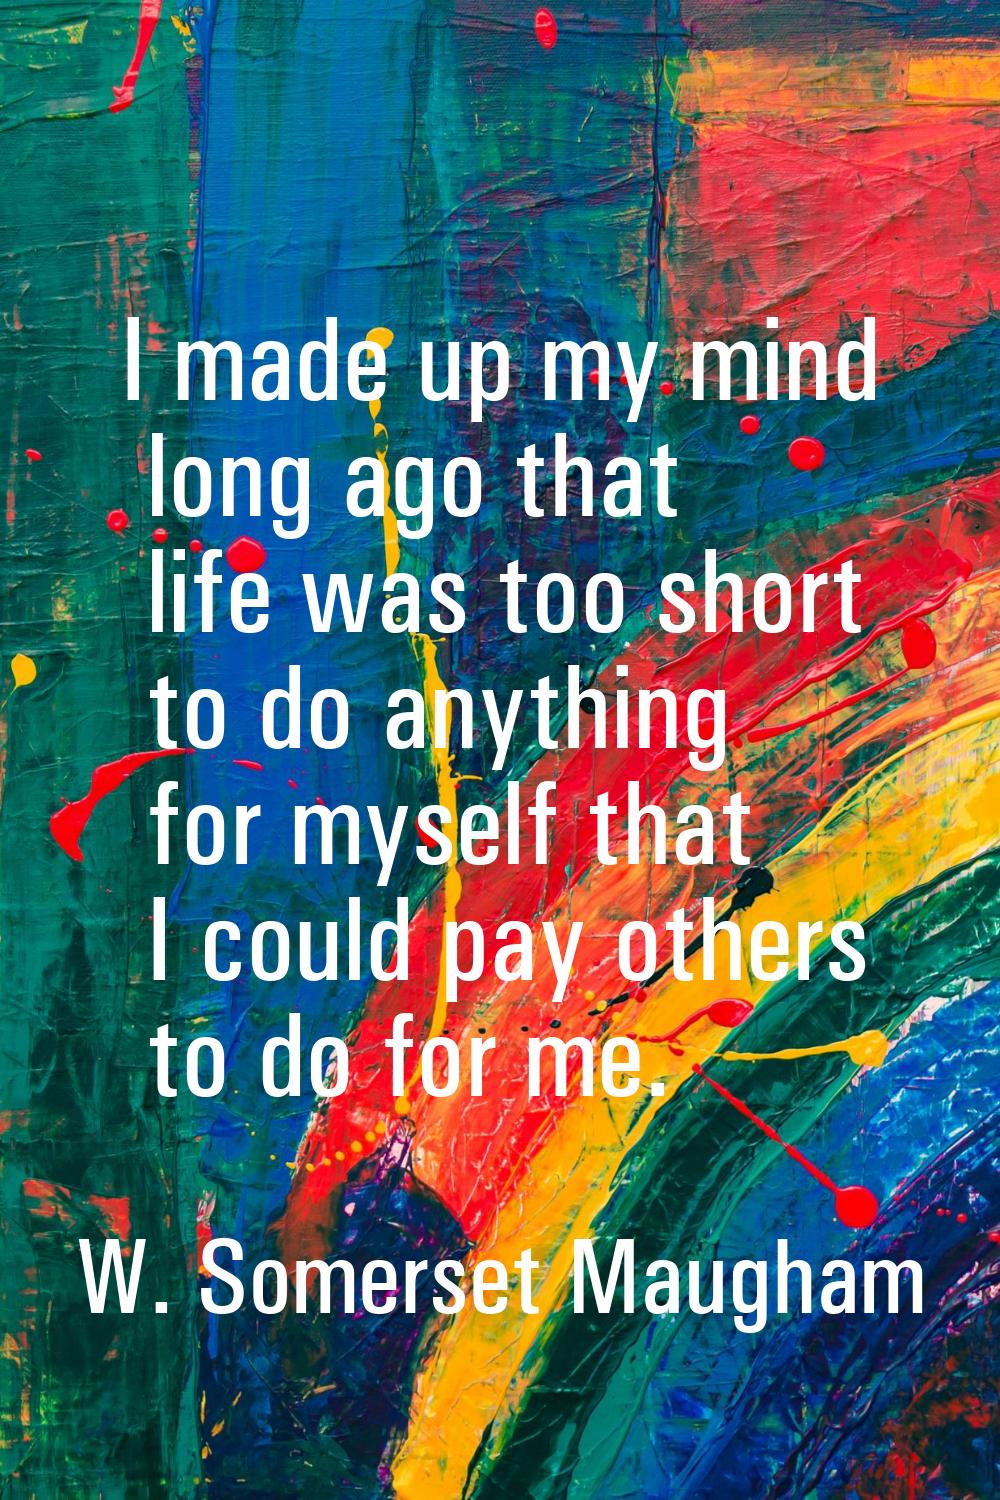 I made up my mind long ago that life was too short to do anything for myself that I could pay other